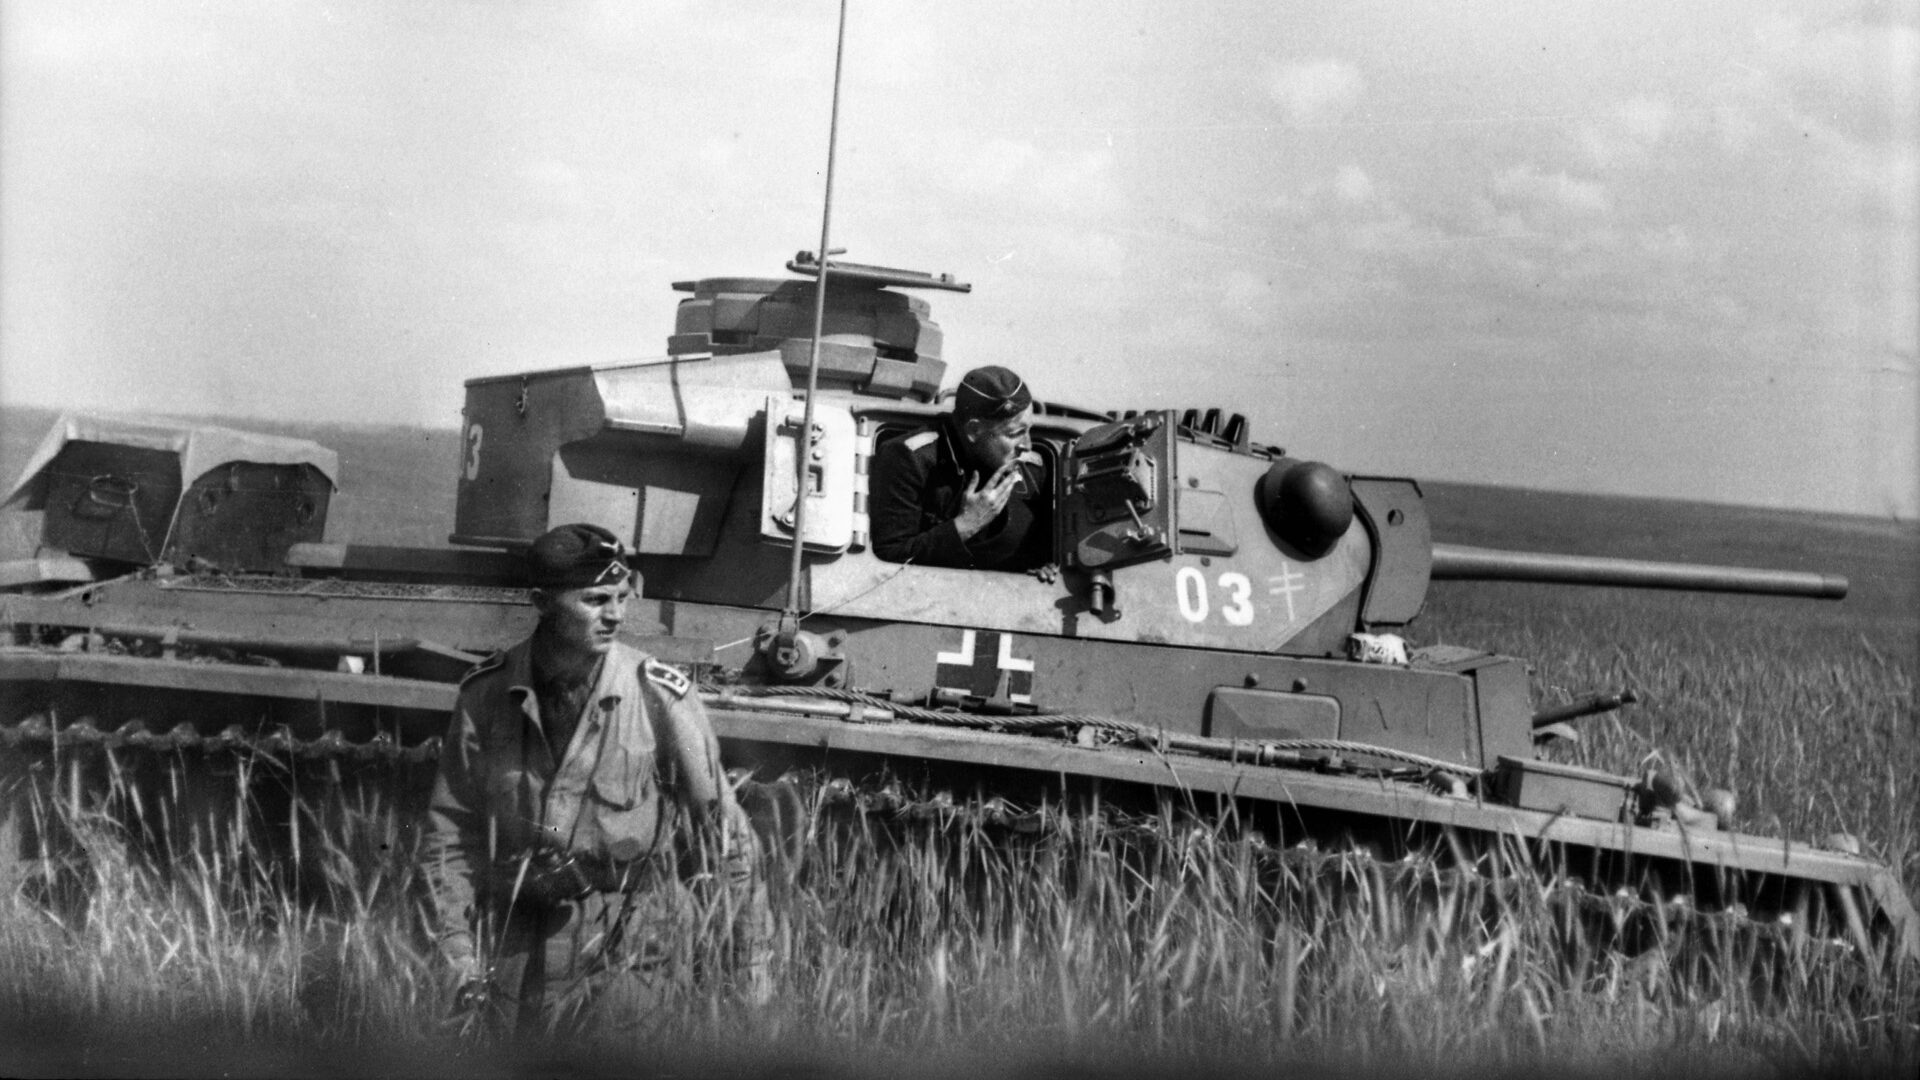 A German tanker stands on the Russian steppe near Voronezh after emerging from the turret of his PzKpfw. III tank. In the summer of 1942, Hitler mounted an armored thrust to the south along the Eastern Front, and it led to ruin.